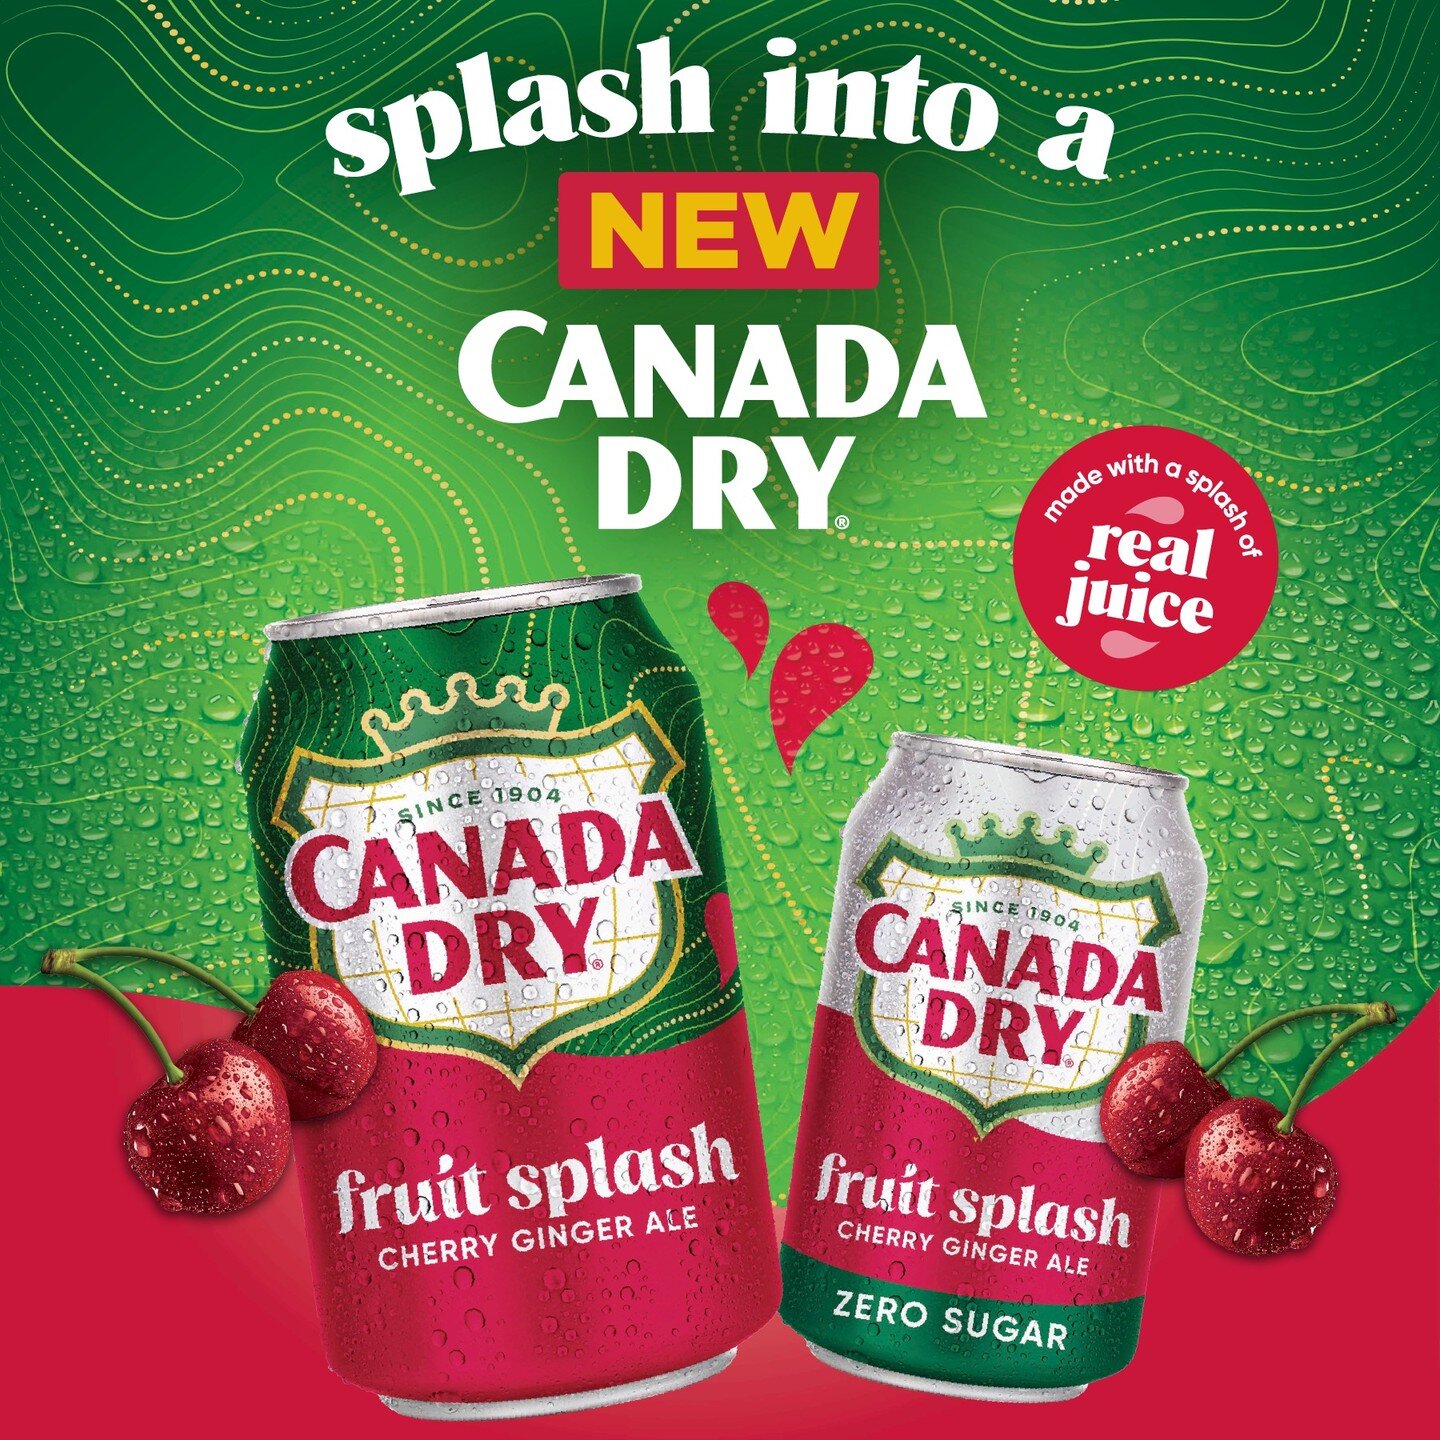 New Canada Dry Fruit Splash Cherry Ginger Ale combines the classic taste of Canada Dry ginger ale with a splash of real juice. This sweet and tangy blend is perfect for enjoying on its own or as a mixer for cocktails. Available in 12oz can 12pks and 